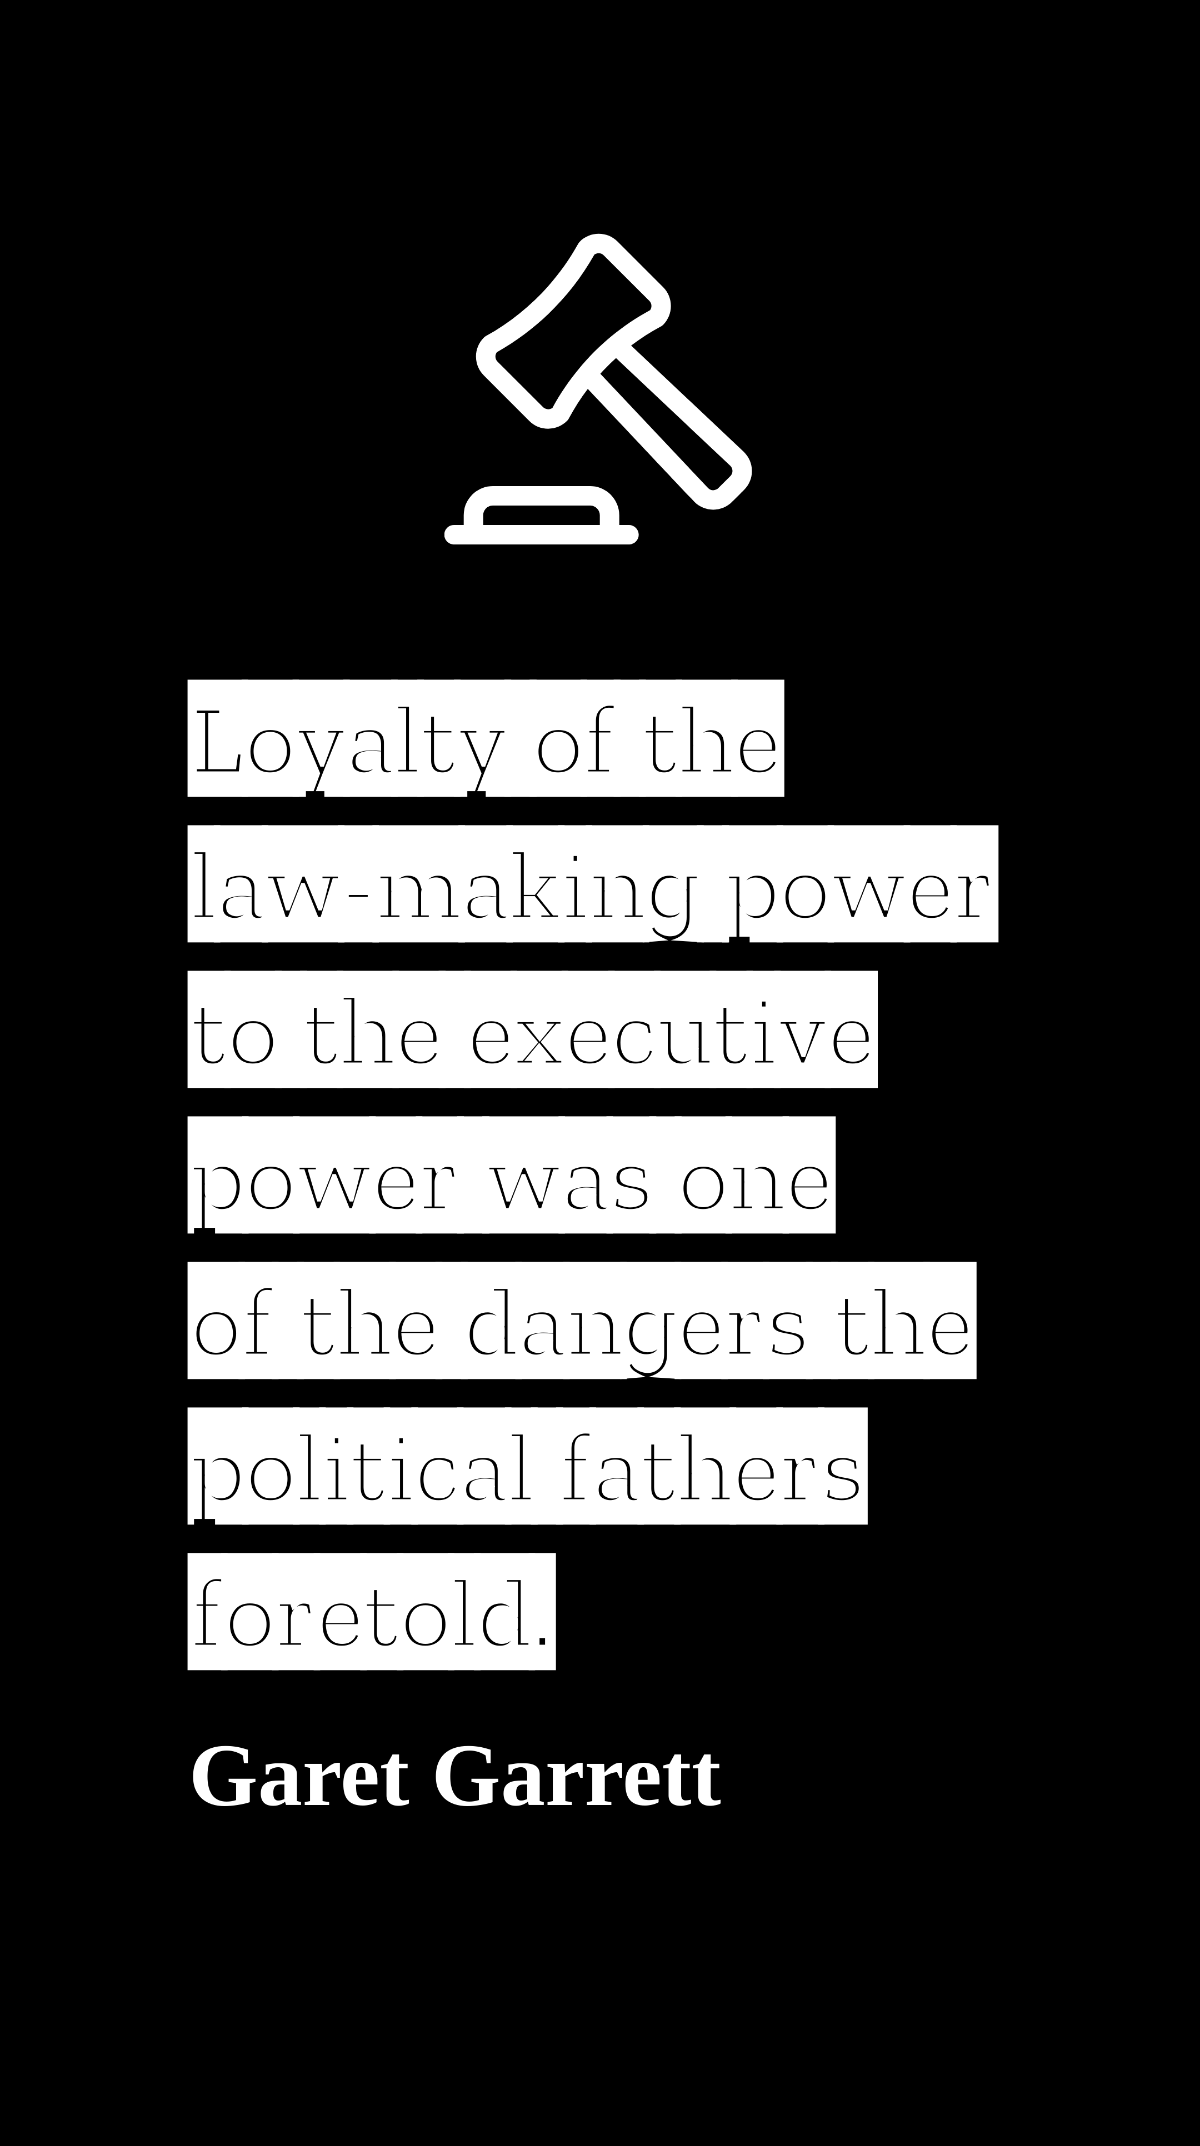 Garet Garrett - Loyalty of the law-making power to the executive power was one of the dangers the political fathers foretold.